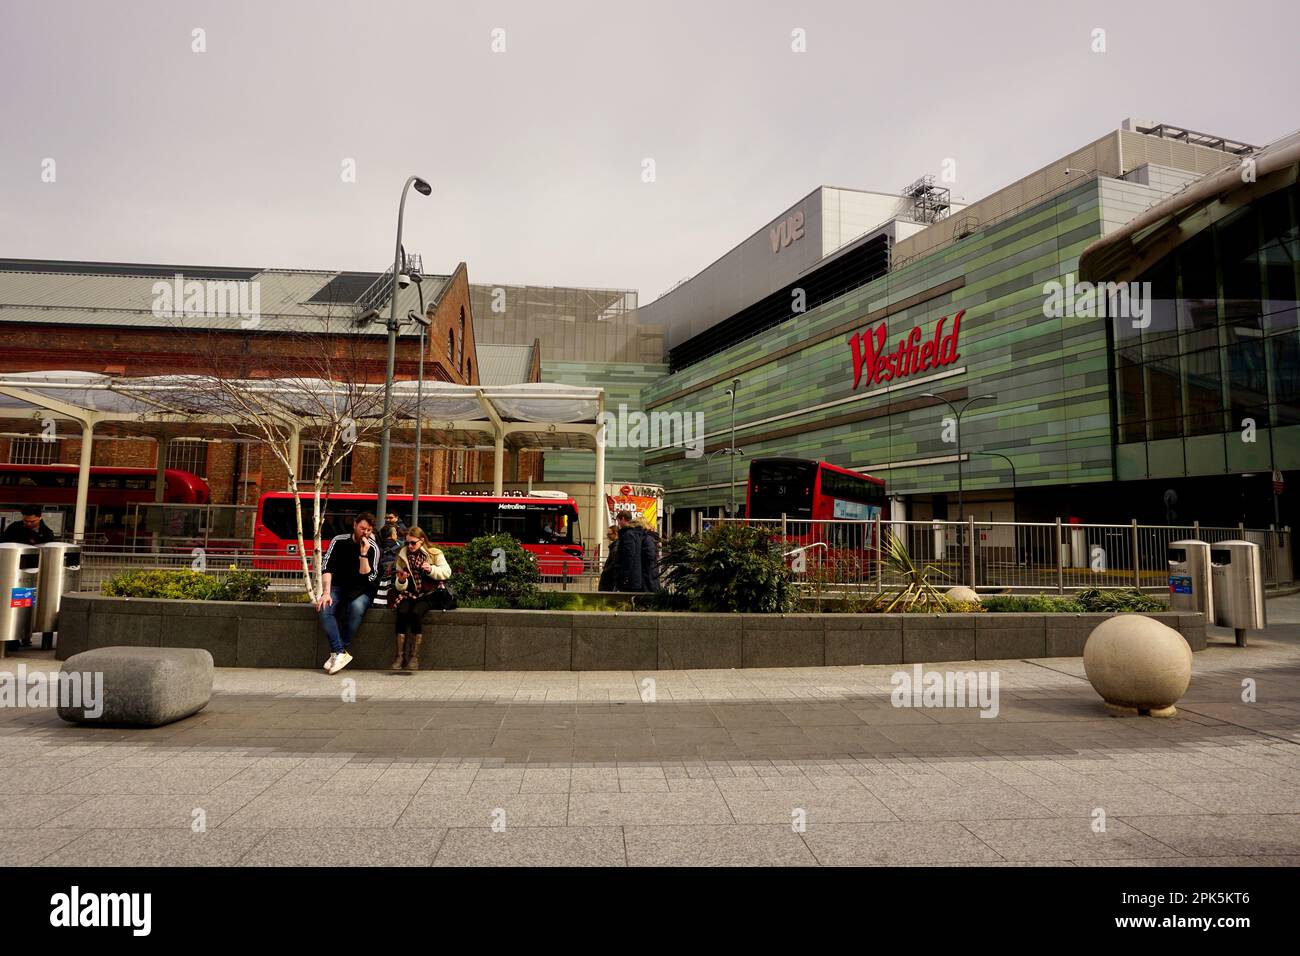 A view of the outside of the Westfield Shopping Center at White City,  Shepherd's Bush in West London, UK Stock Photo - Alamy